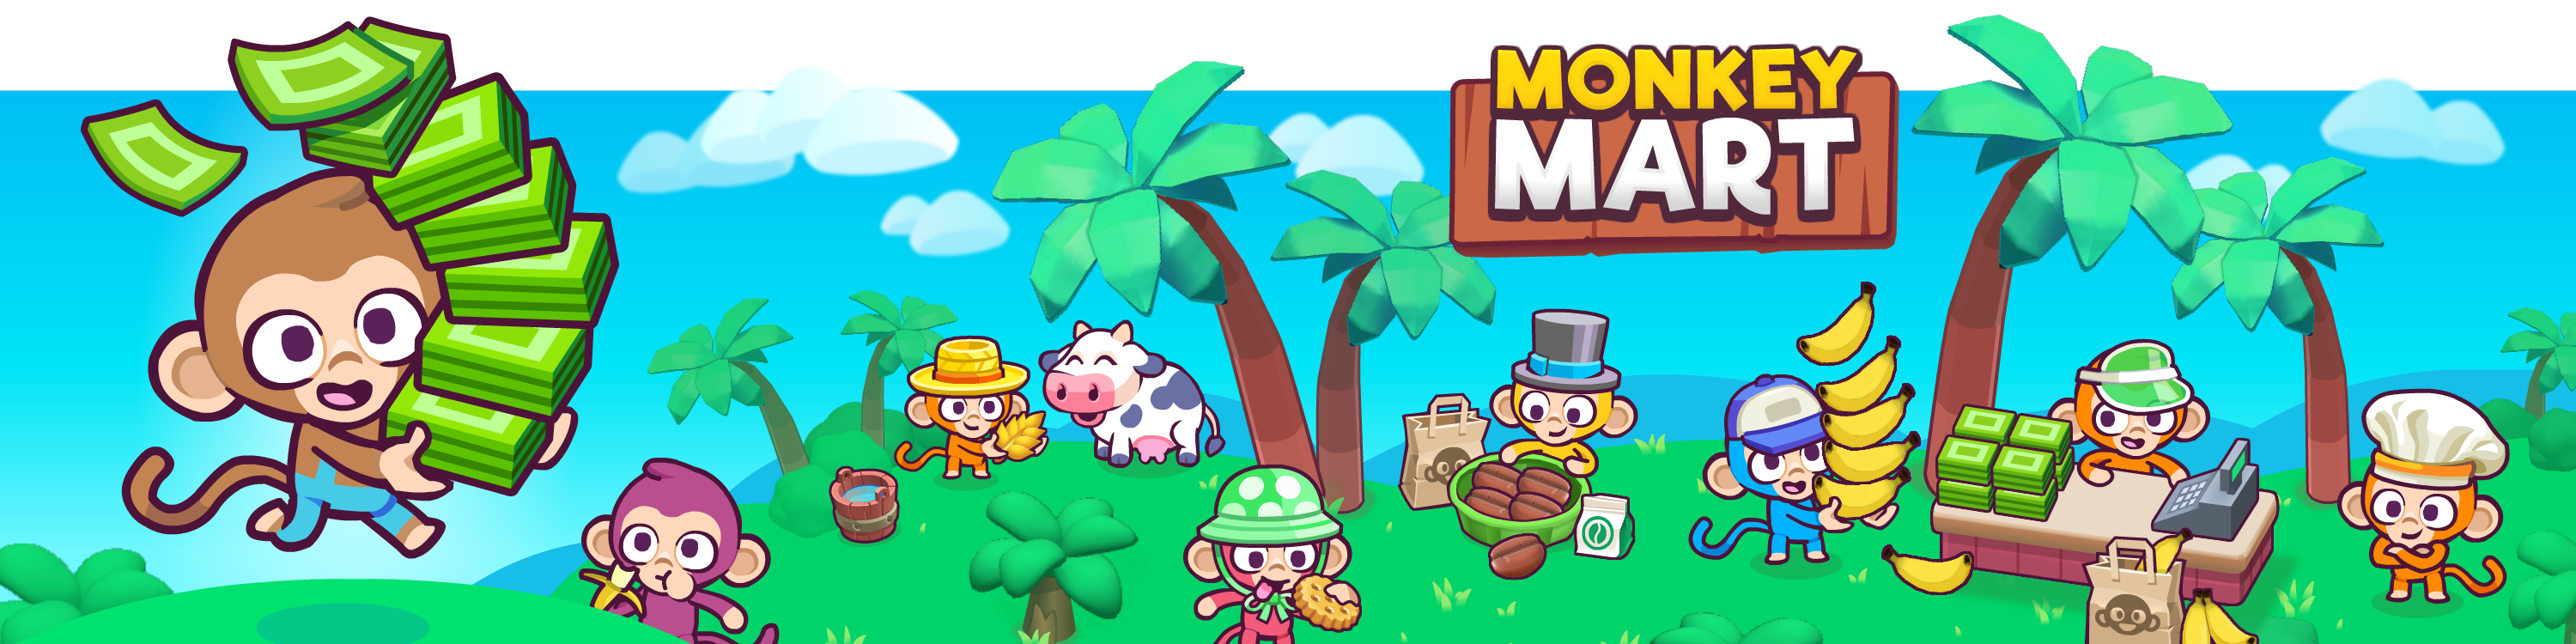 Monkey Mart - Play Game Online